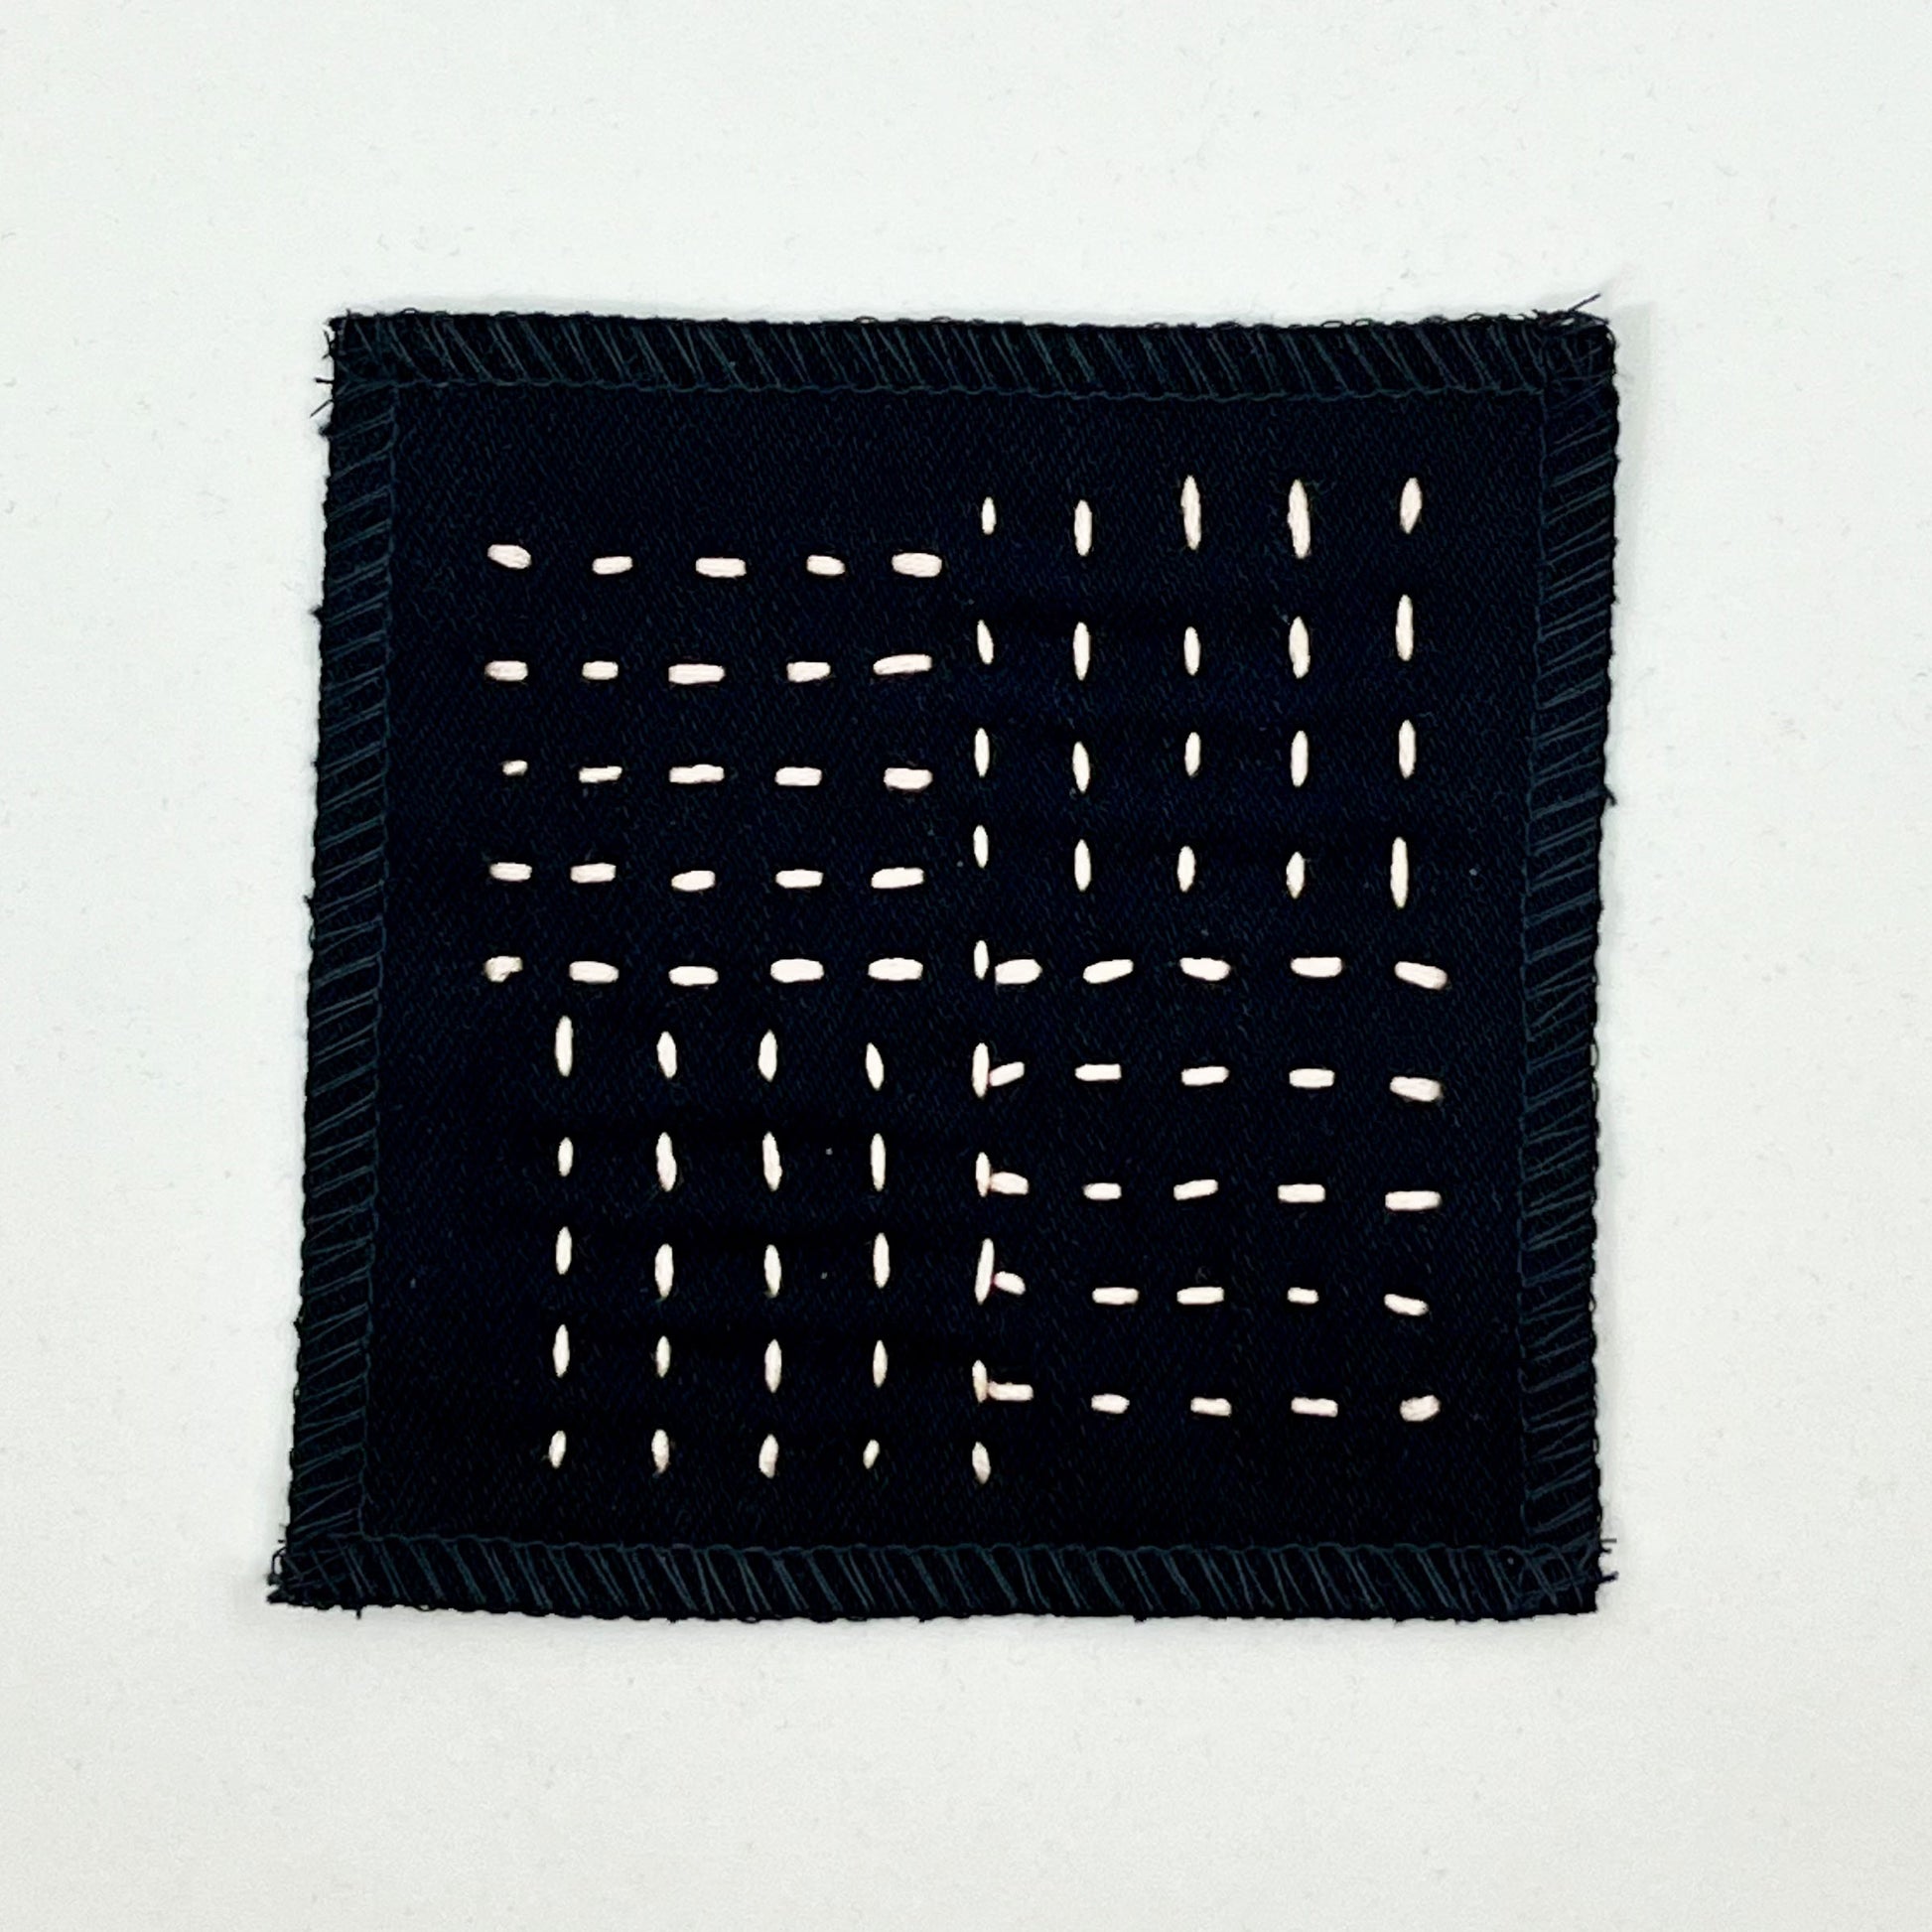 a square black denim patch hand stitched in peach with sashiko style running stitches in the pattern of a basket weave on a white background